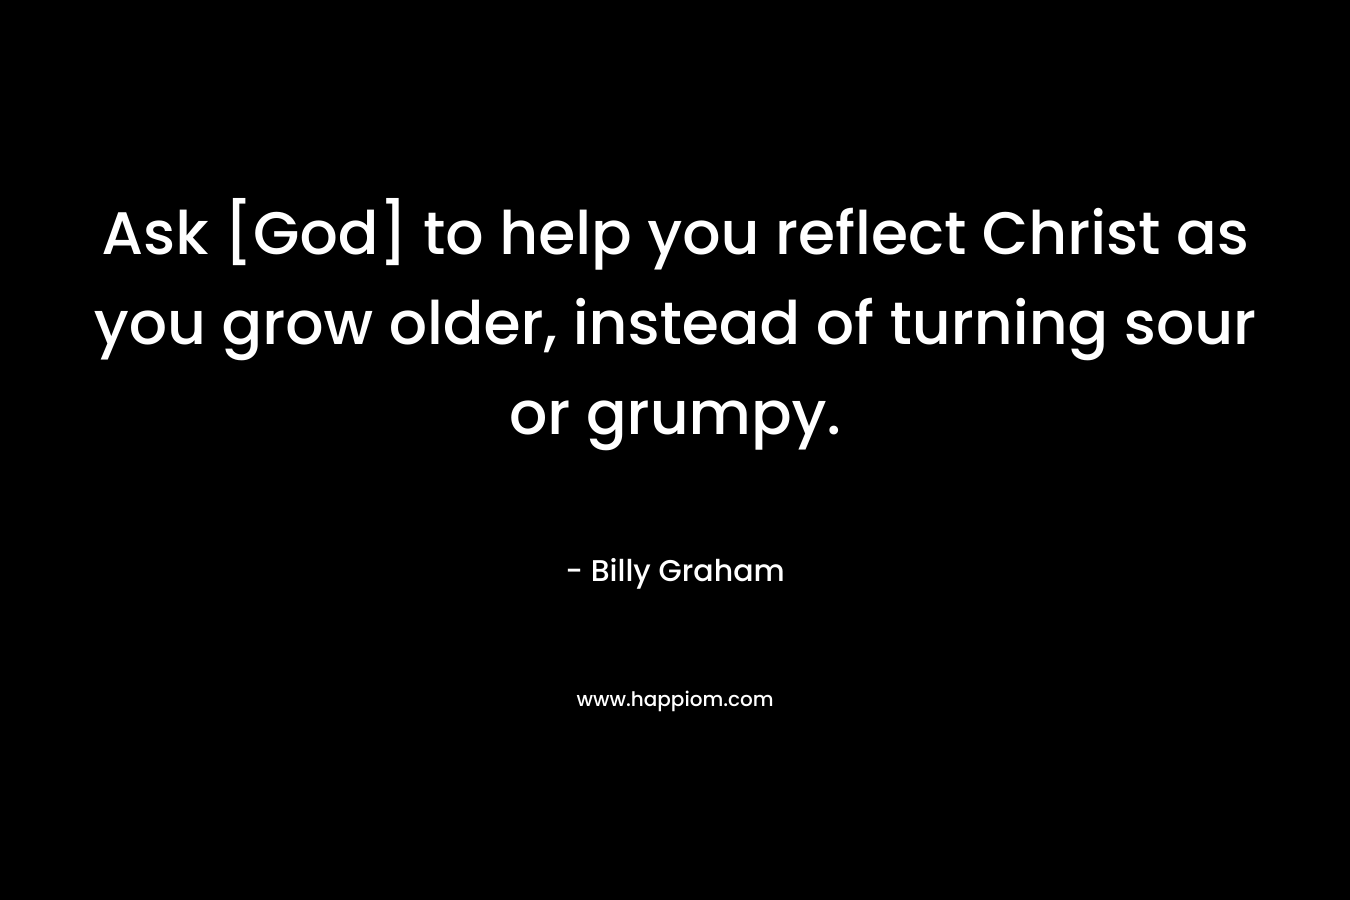 Ask [God] to help you reflect Christ as you grow older, instead of turning sour or grumpy. – Billy Graham